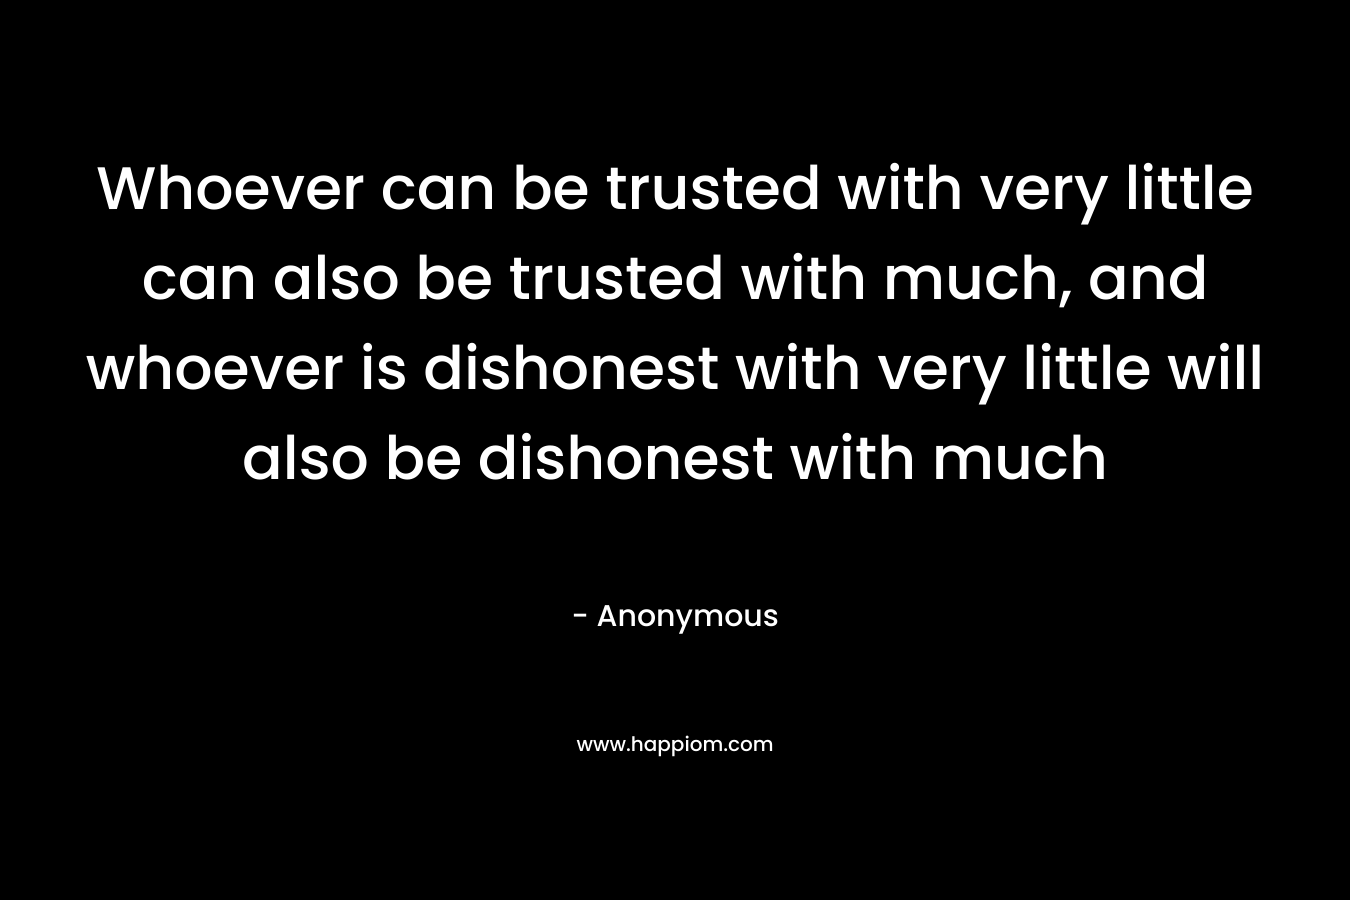 Whoever can be trusted with very little can also be trusted with much, and whoever is dishonest with very little will also be dishonest with much